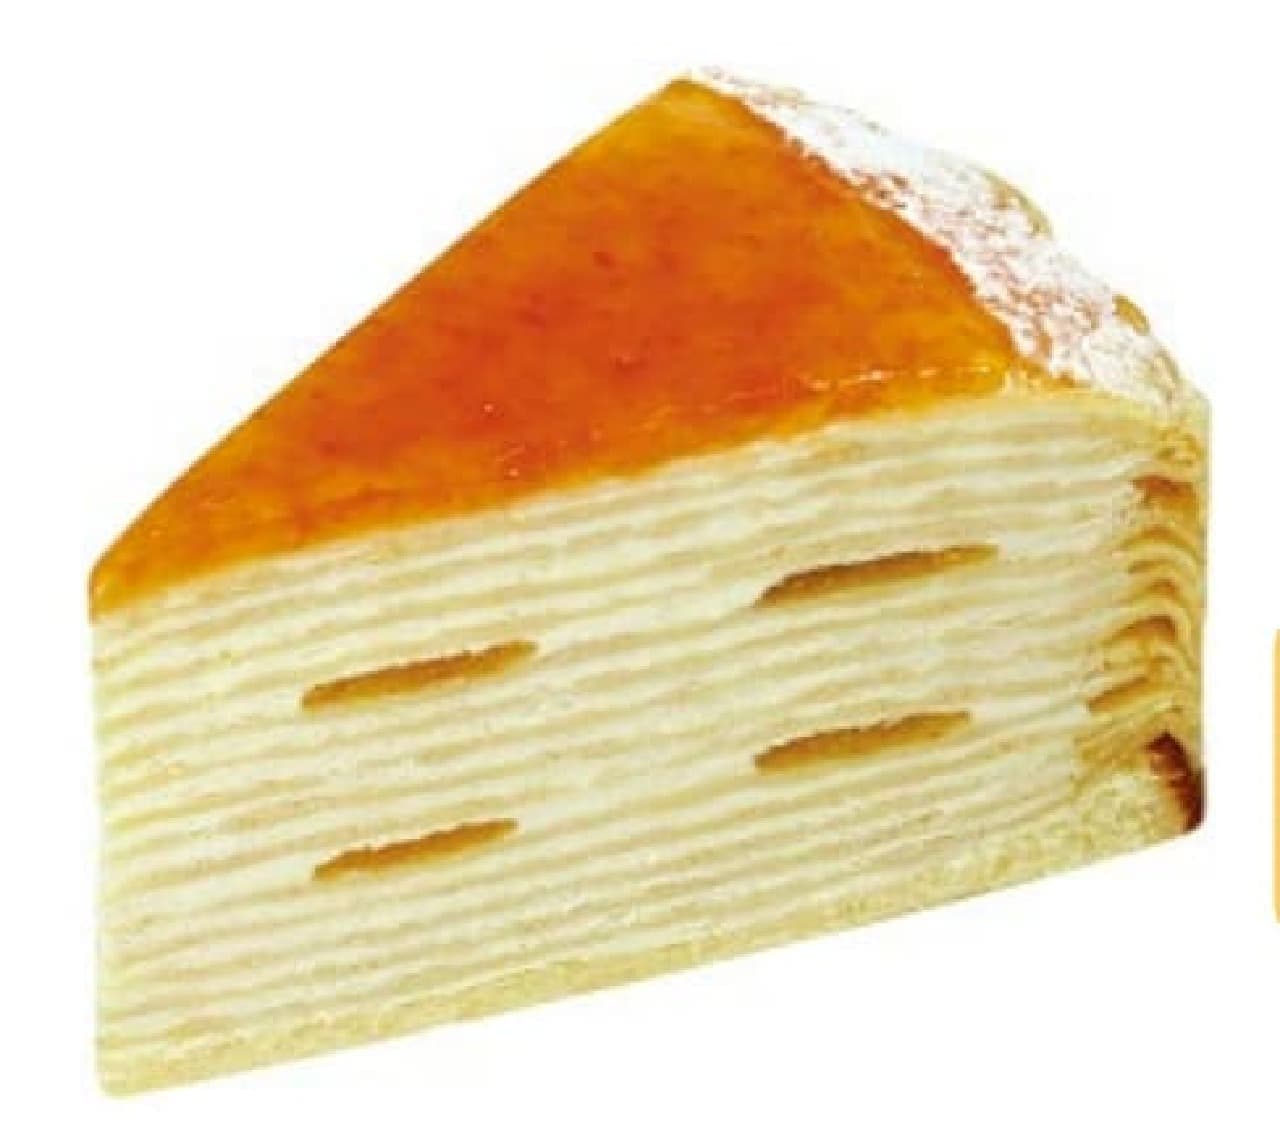 Fujiya Confectionery "Mille Crepe of Mentha from Ehime".